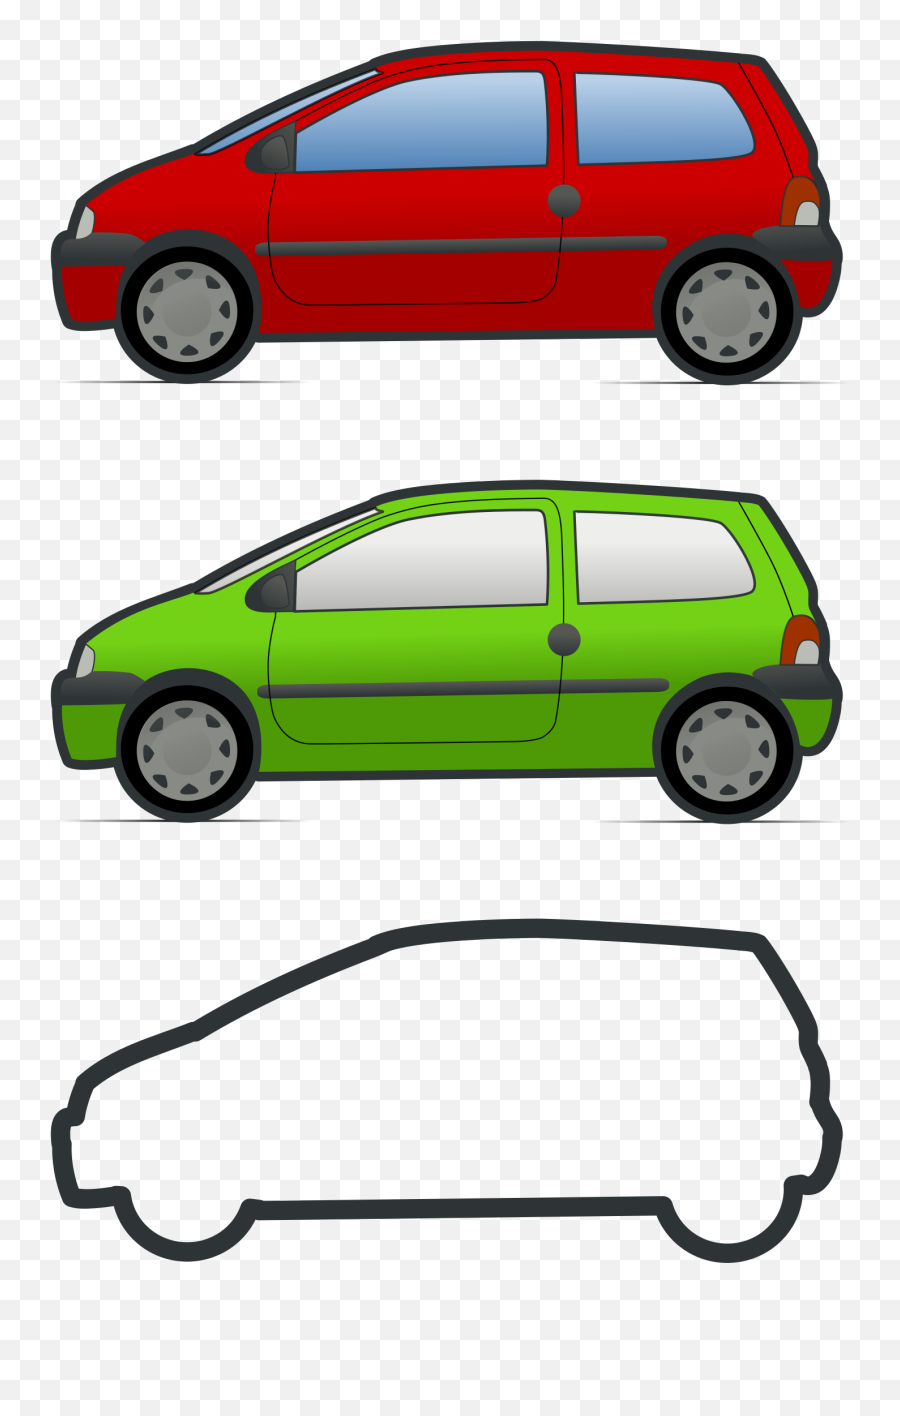 Red And Green Car Icon Png Clipart - Car Clipart Small,Green Car Png